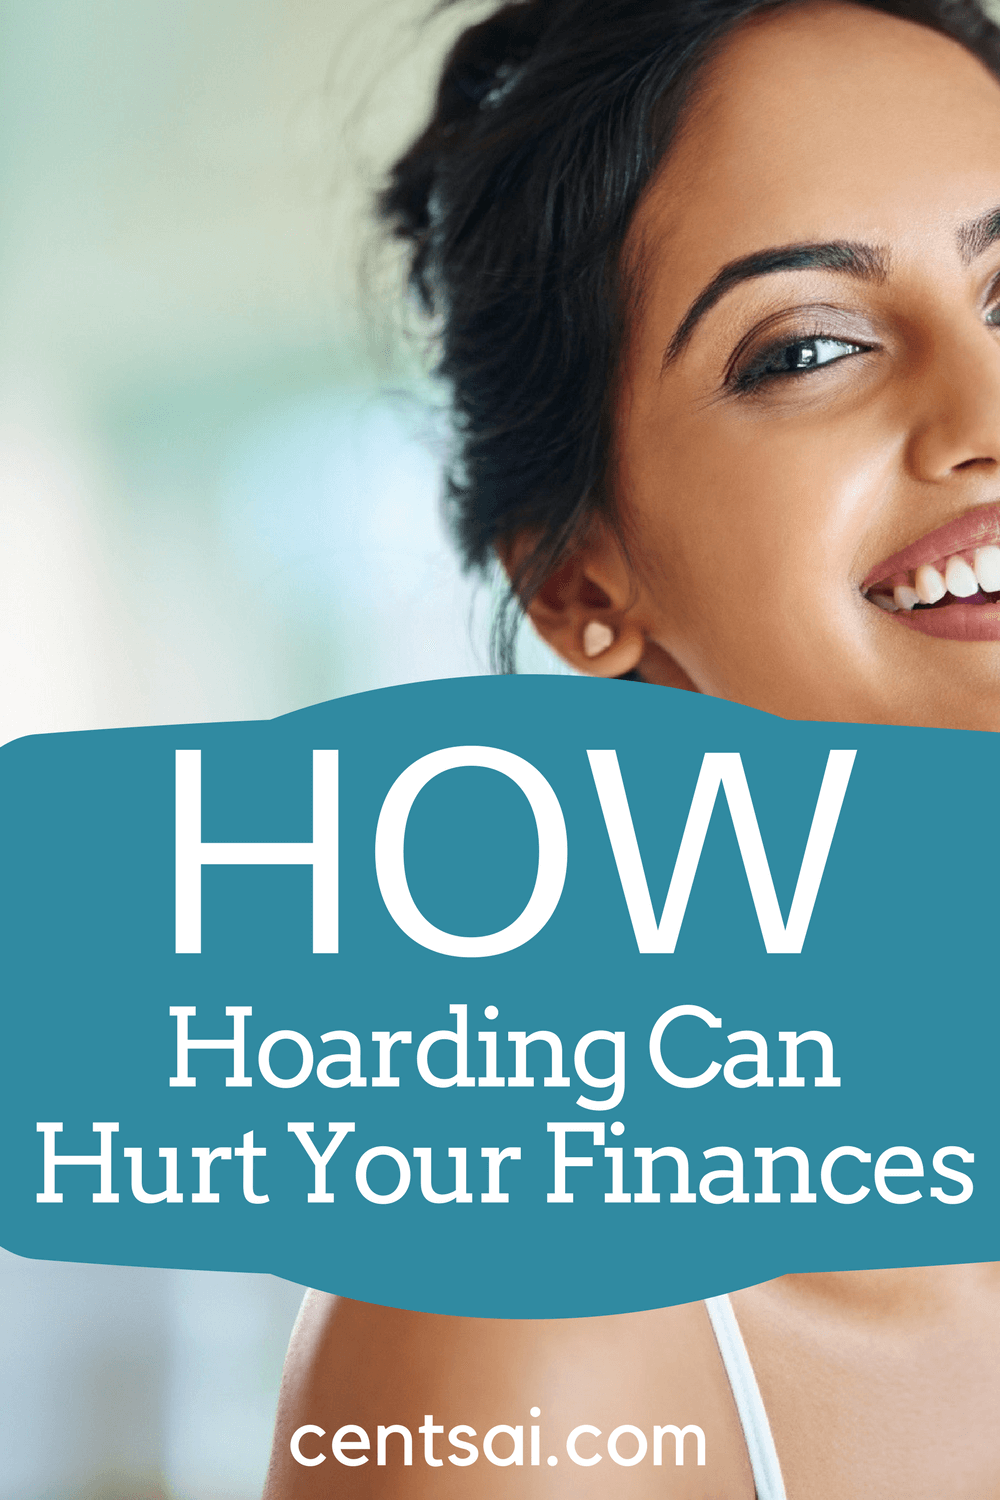 How Hoarding Can Hurt Your Finances. Begin by understanding that hoarders aren't just being lazy - they may be dealing with all sorts of issues. But how can you help them?